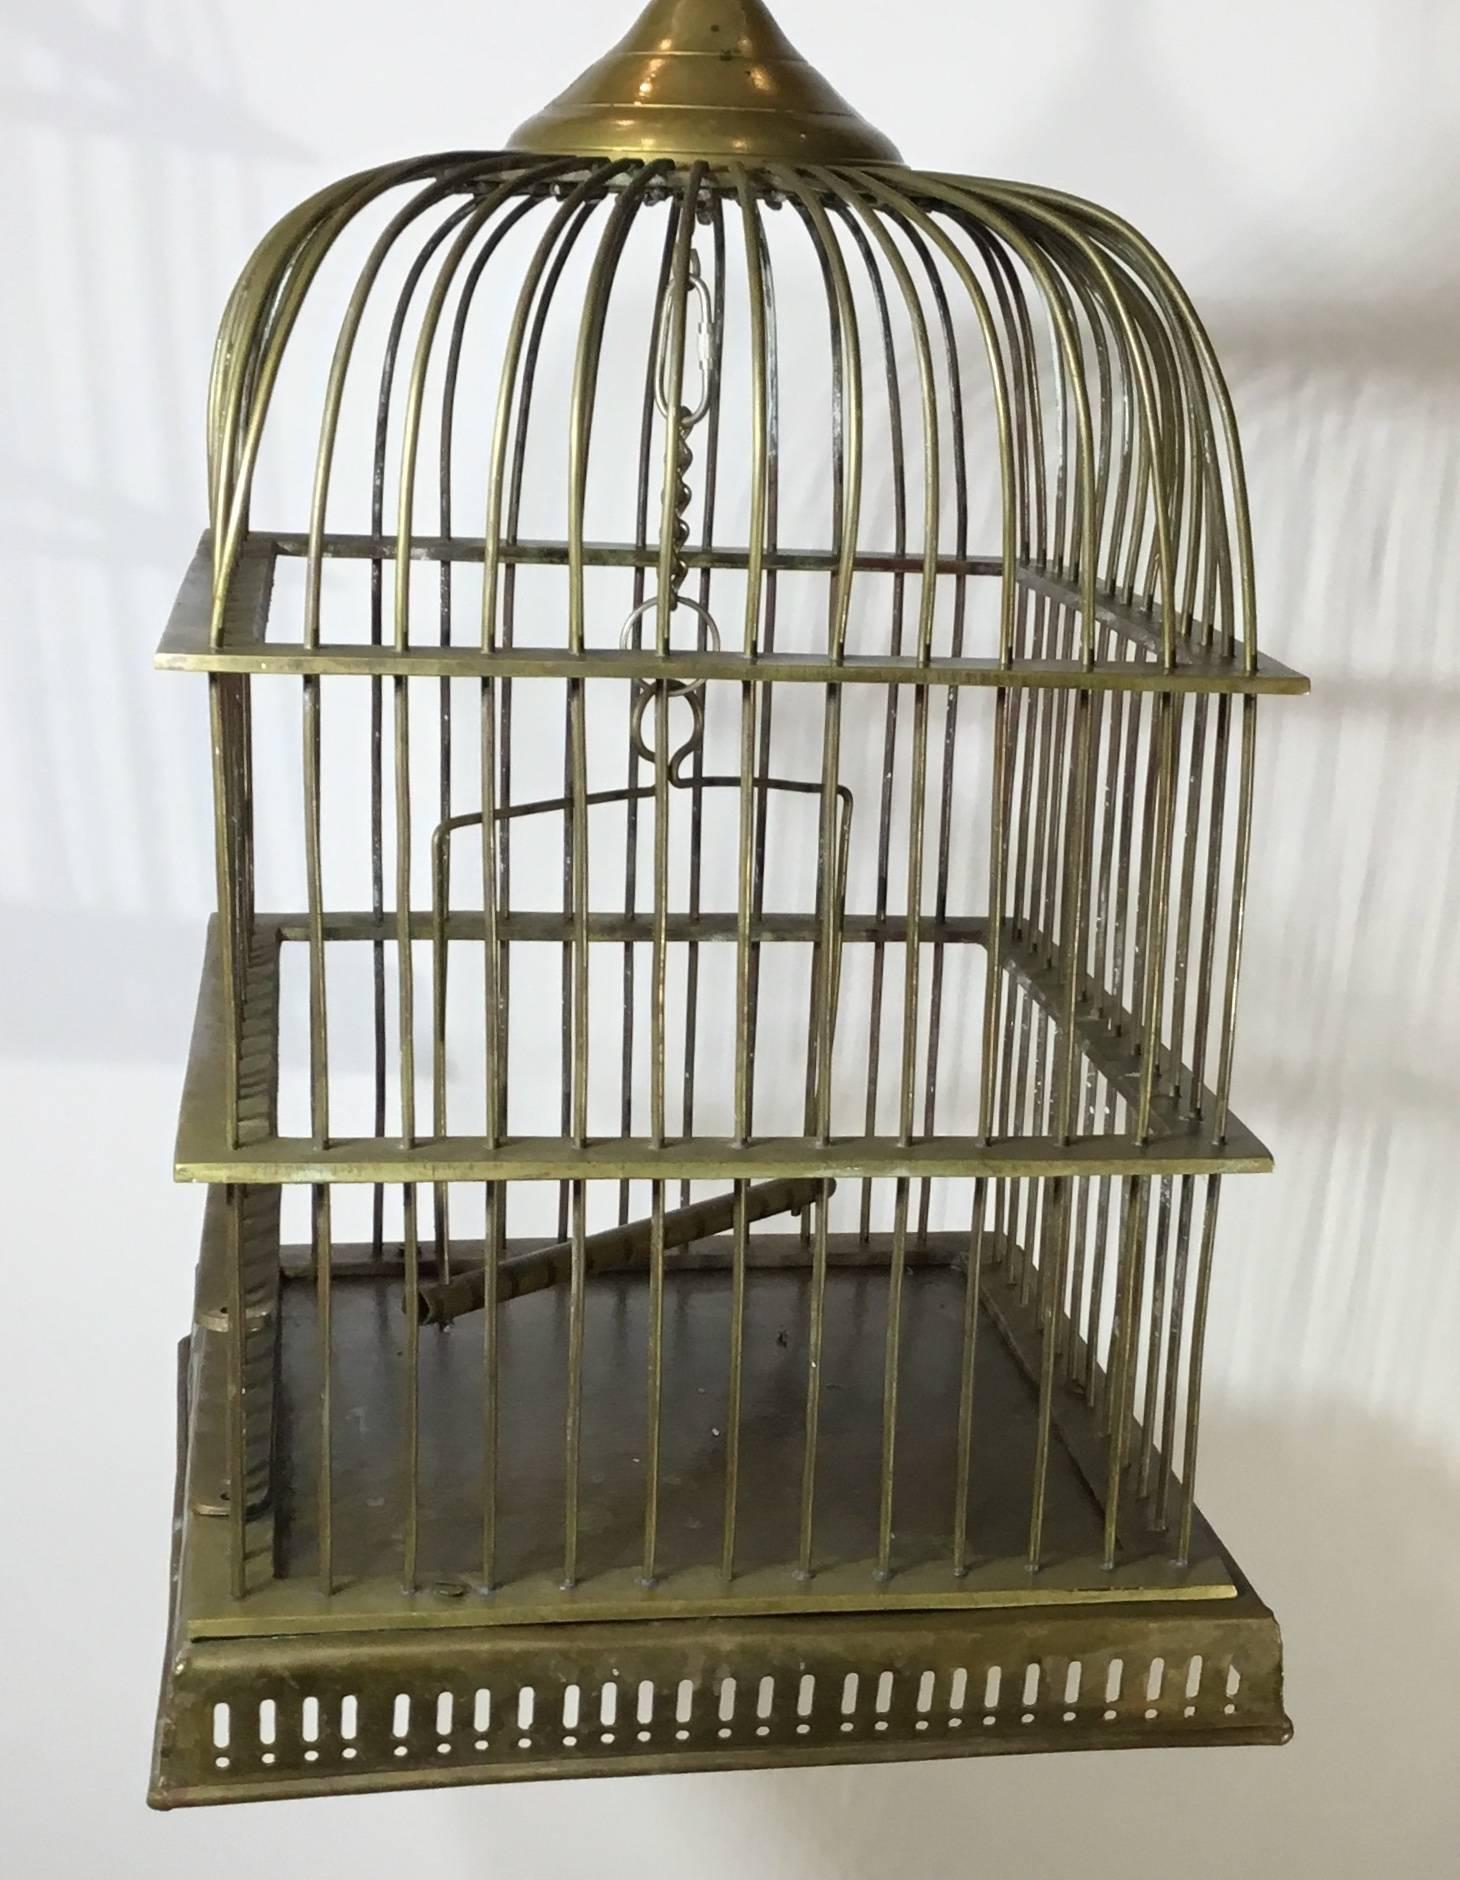 Charming antique handcrafted brass birdcage, featuring four sides body and domed top with swinging perch inside.